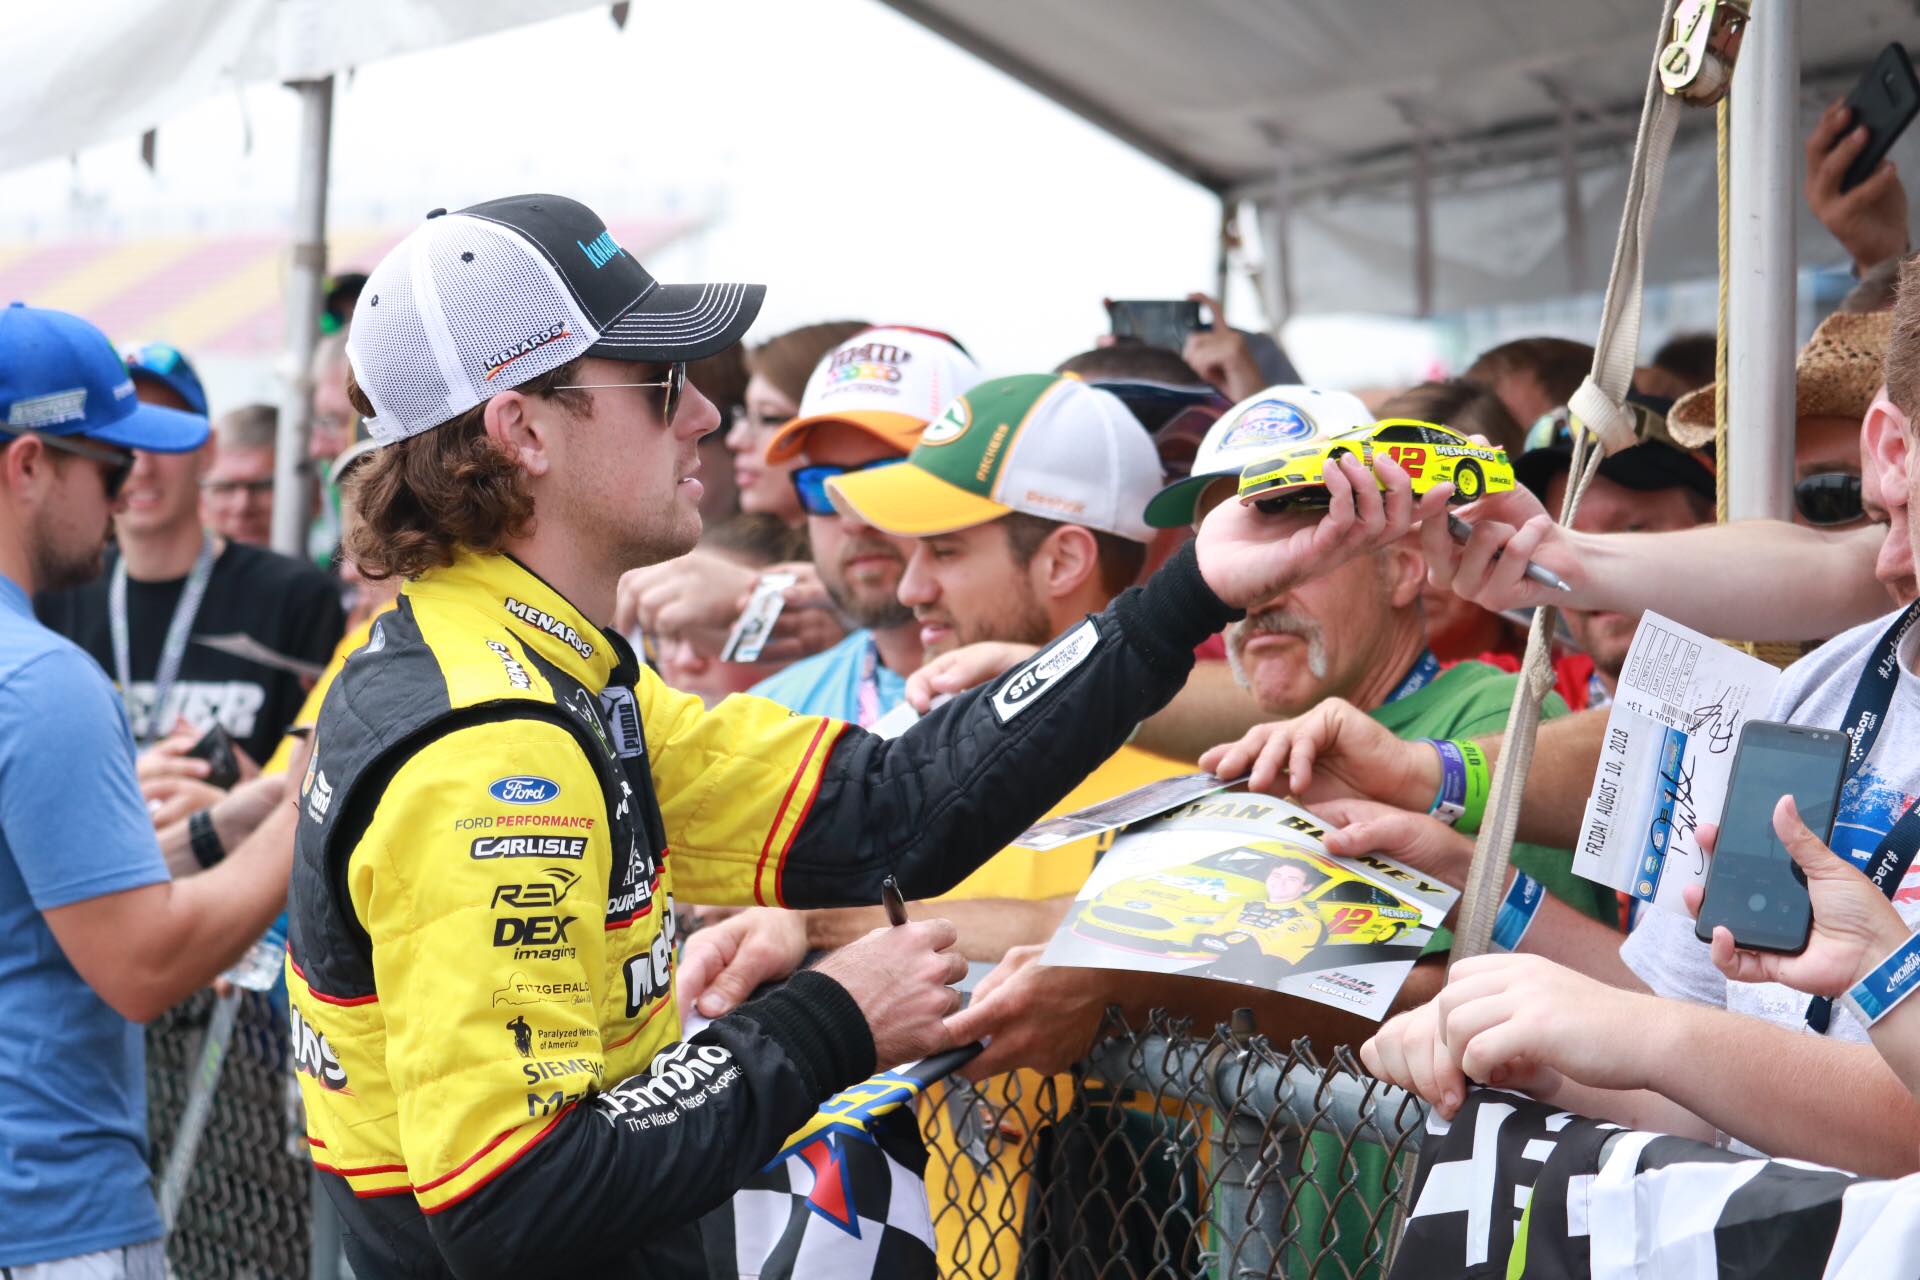 Die-cast cars allow for great memories whether for fans or drivers like Blaney. (Photo Credit: Kathleen Cassidy/TPF)